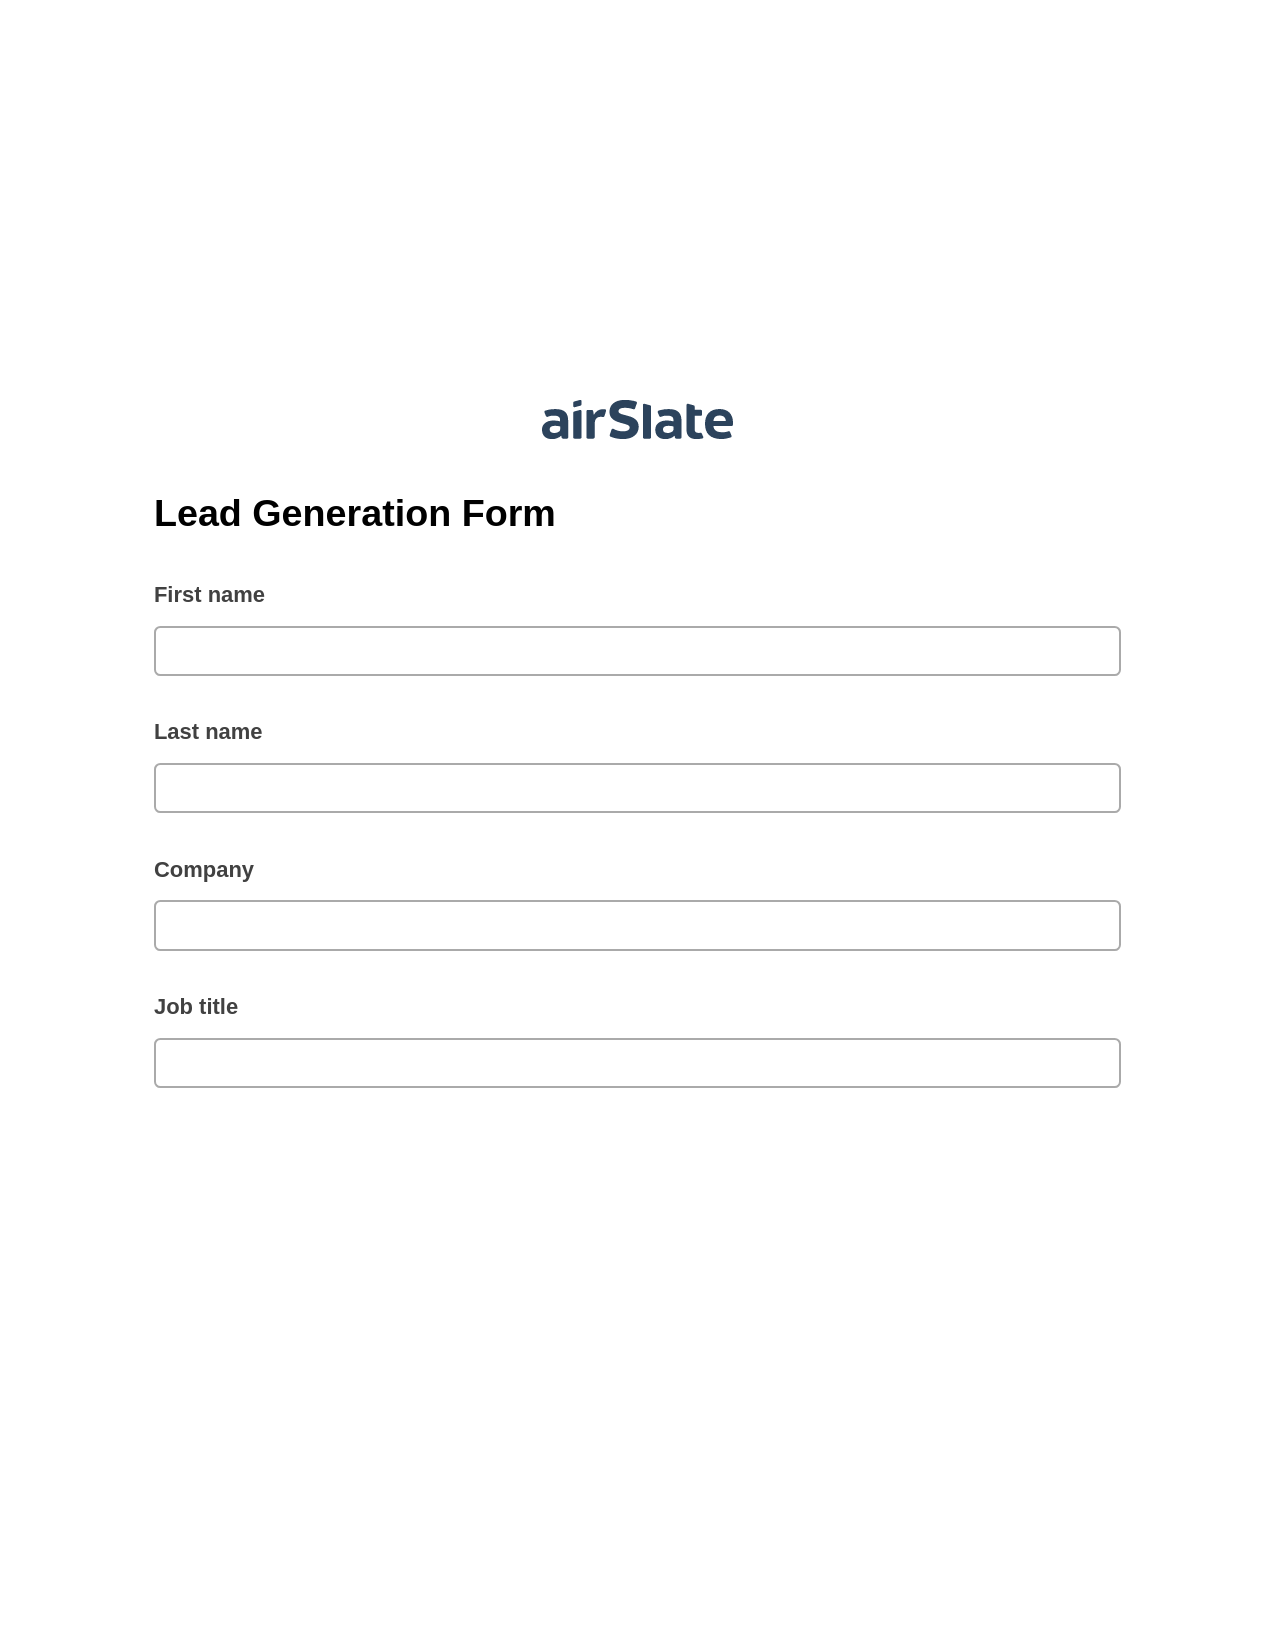 Lead Generation Form Pre-fill from another Slate Bot, Create slate bot, Post-finish Document Bot